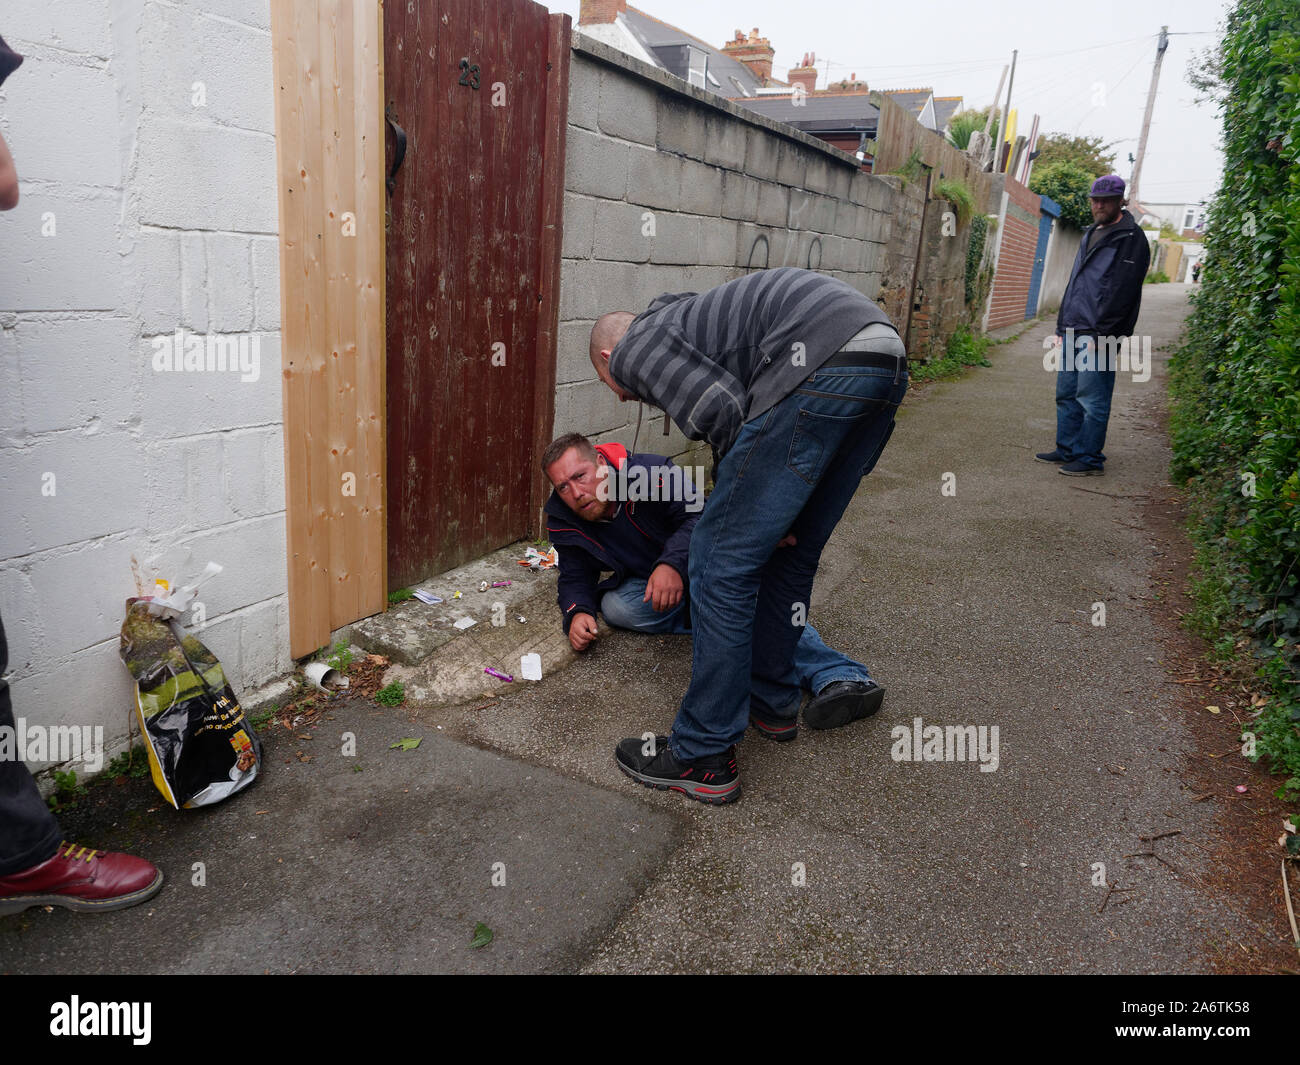 Newquay, Cornwall, England, 16th September 2019. Street drug user with National Health provided drug use kit collapses in the street.. Credit: Robert Stock Photo